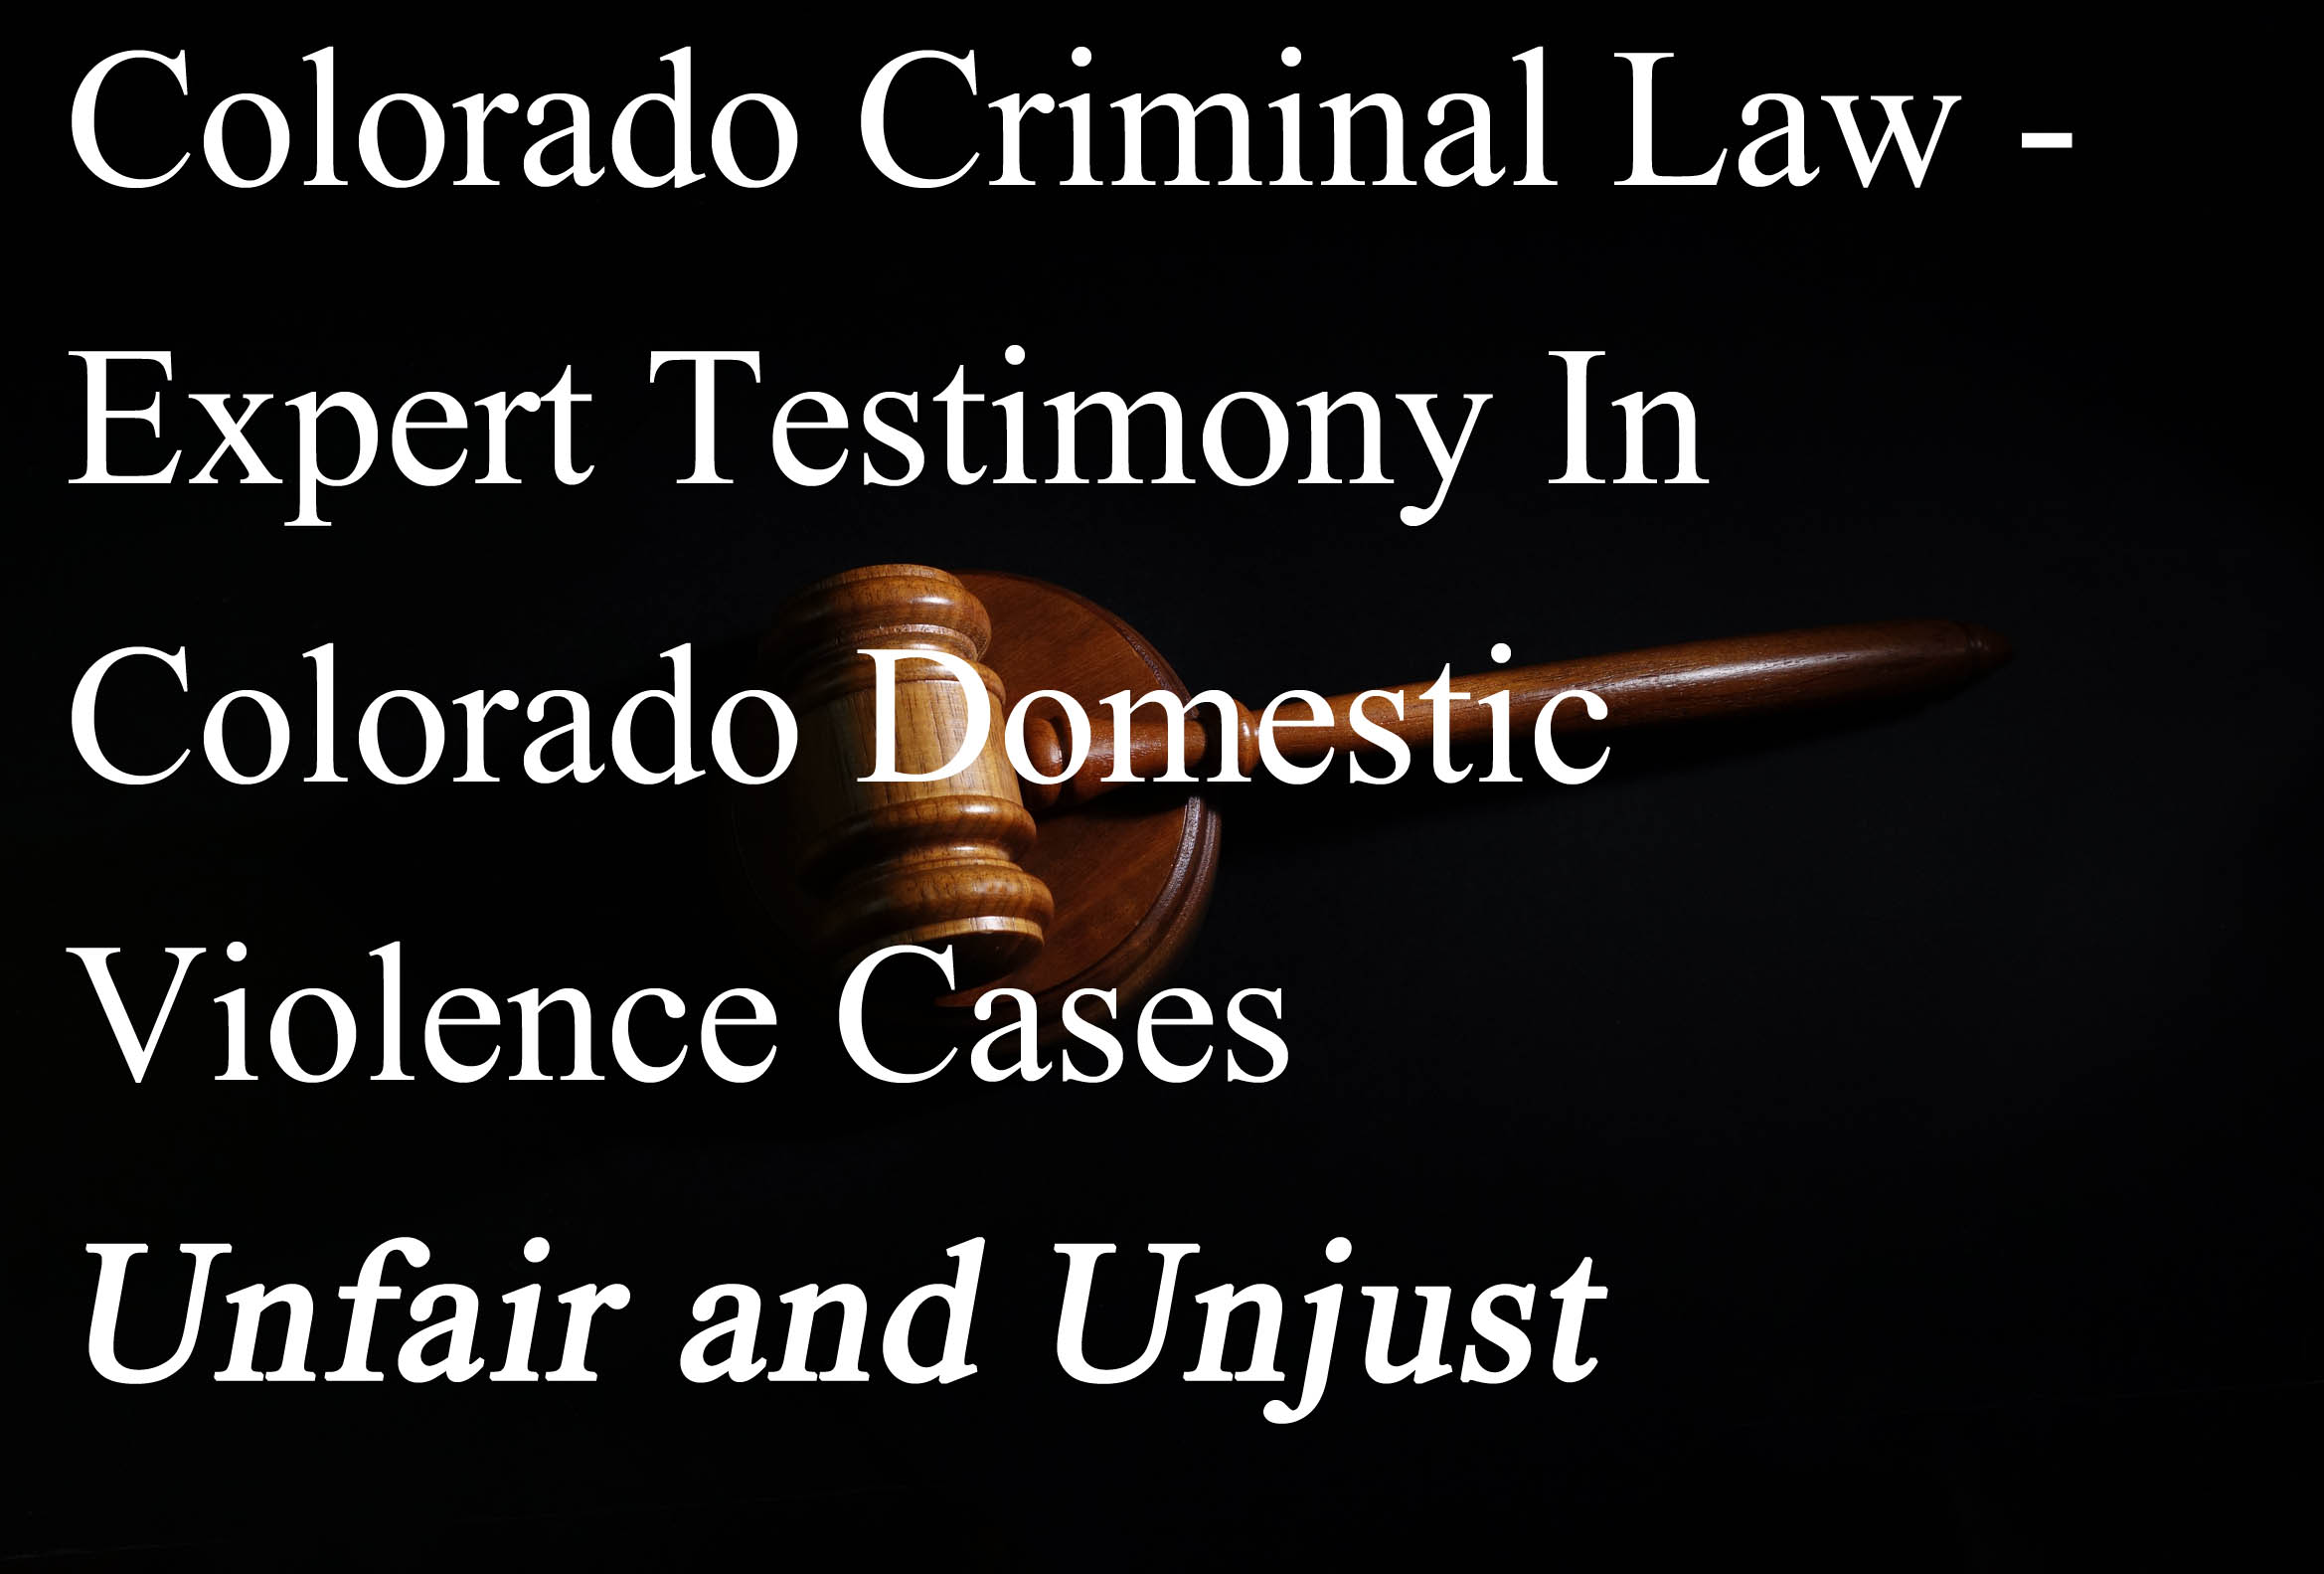 Colorado Criminal Law - Expert Testimony In Colorado Domestic Violence Cases - Unfair and Unjust